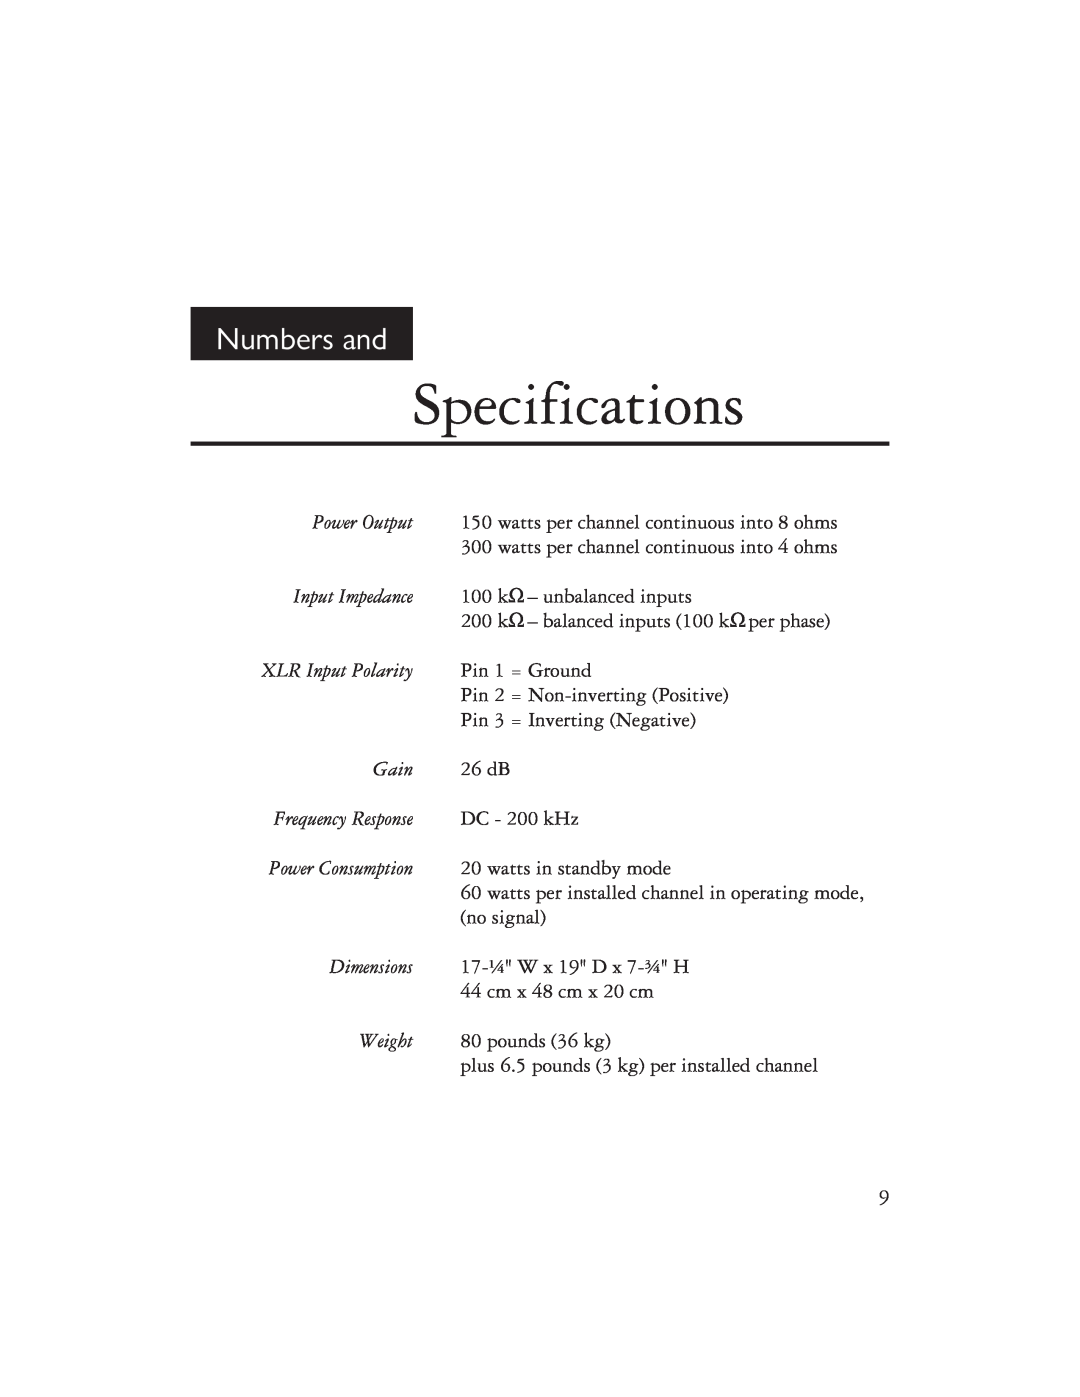 Ayre Acoustics Power Amplifier owner manual Specifications, Numbers and 